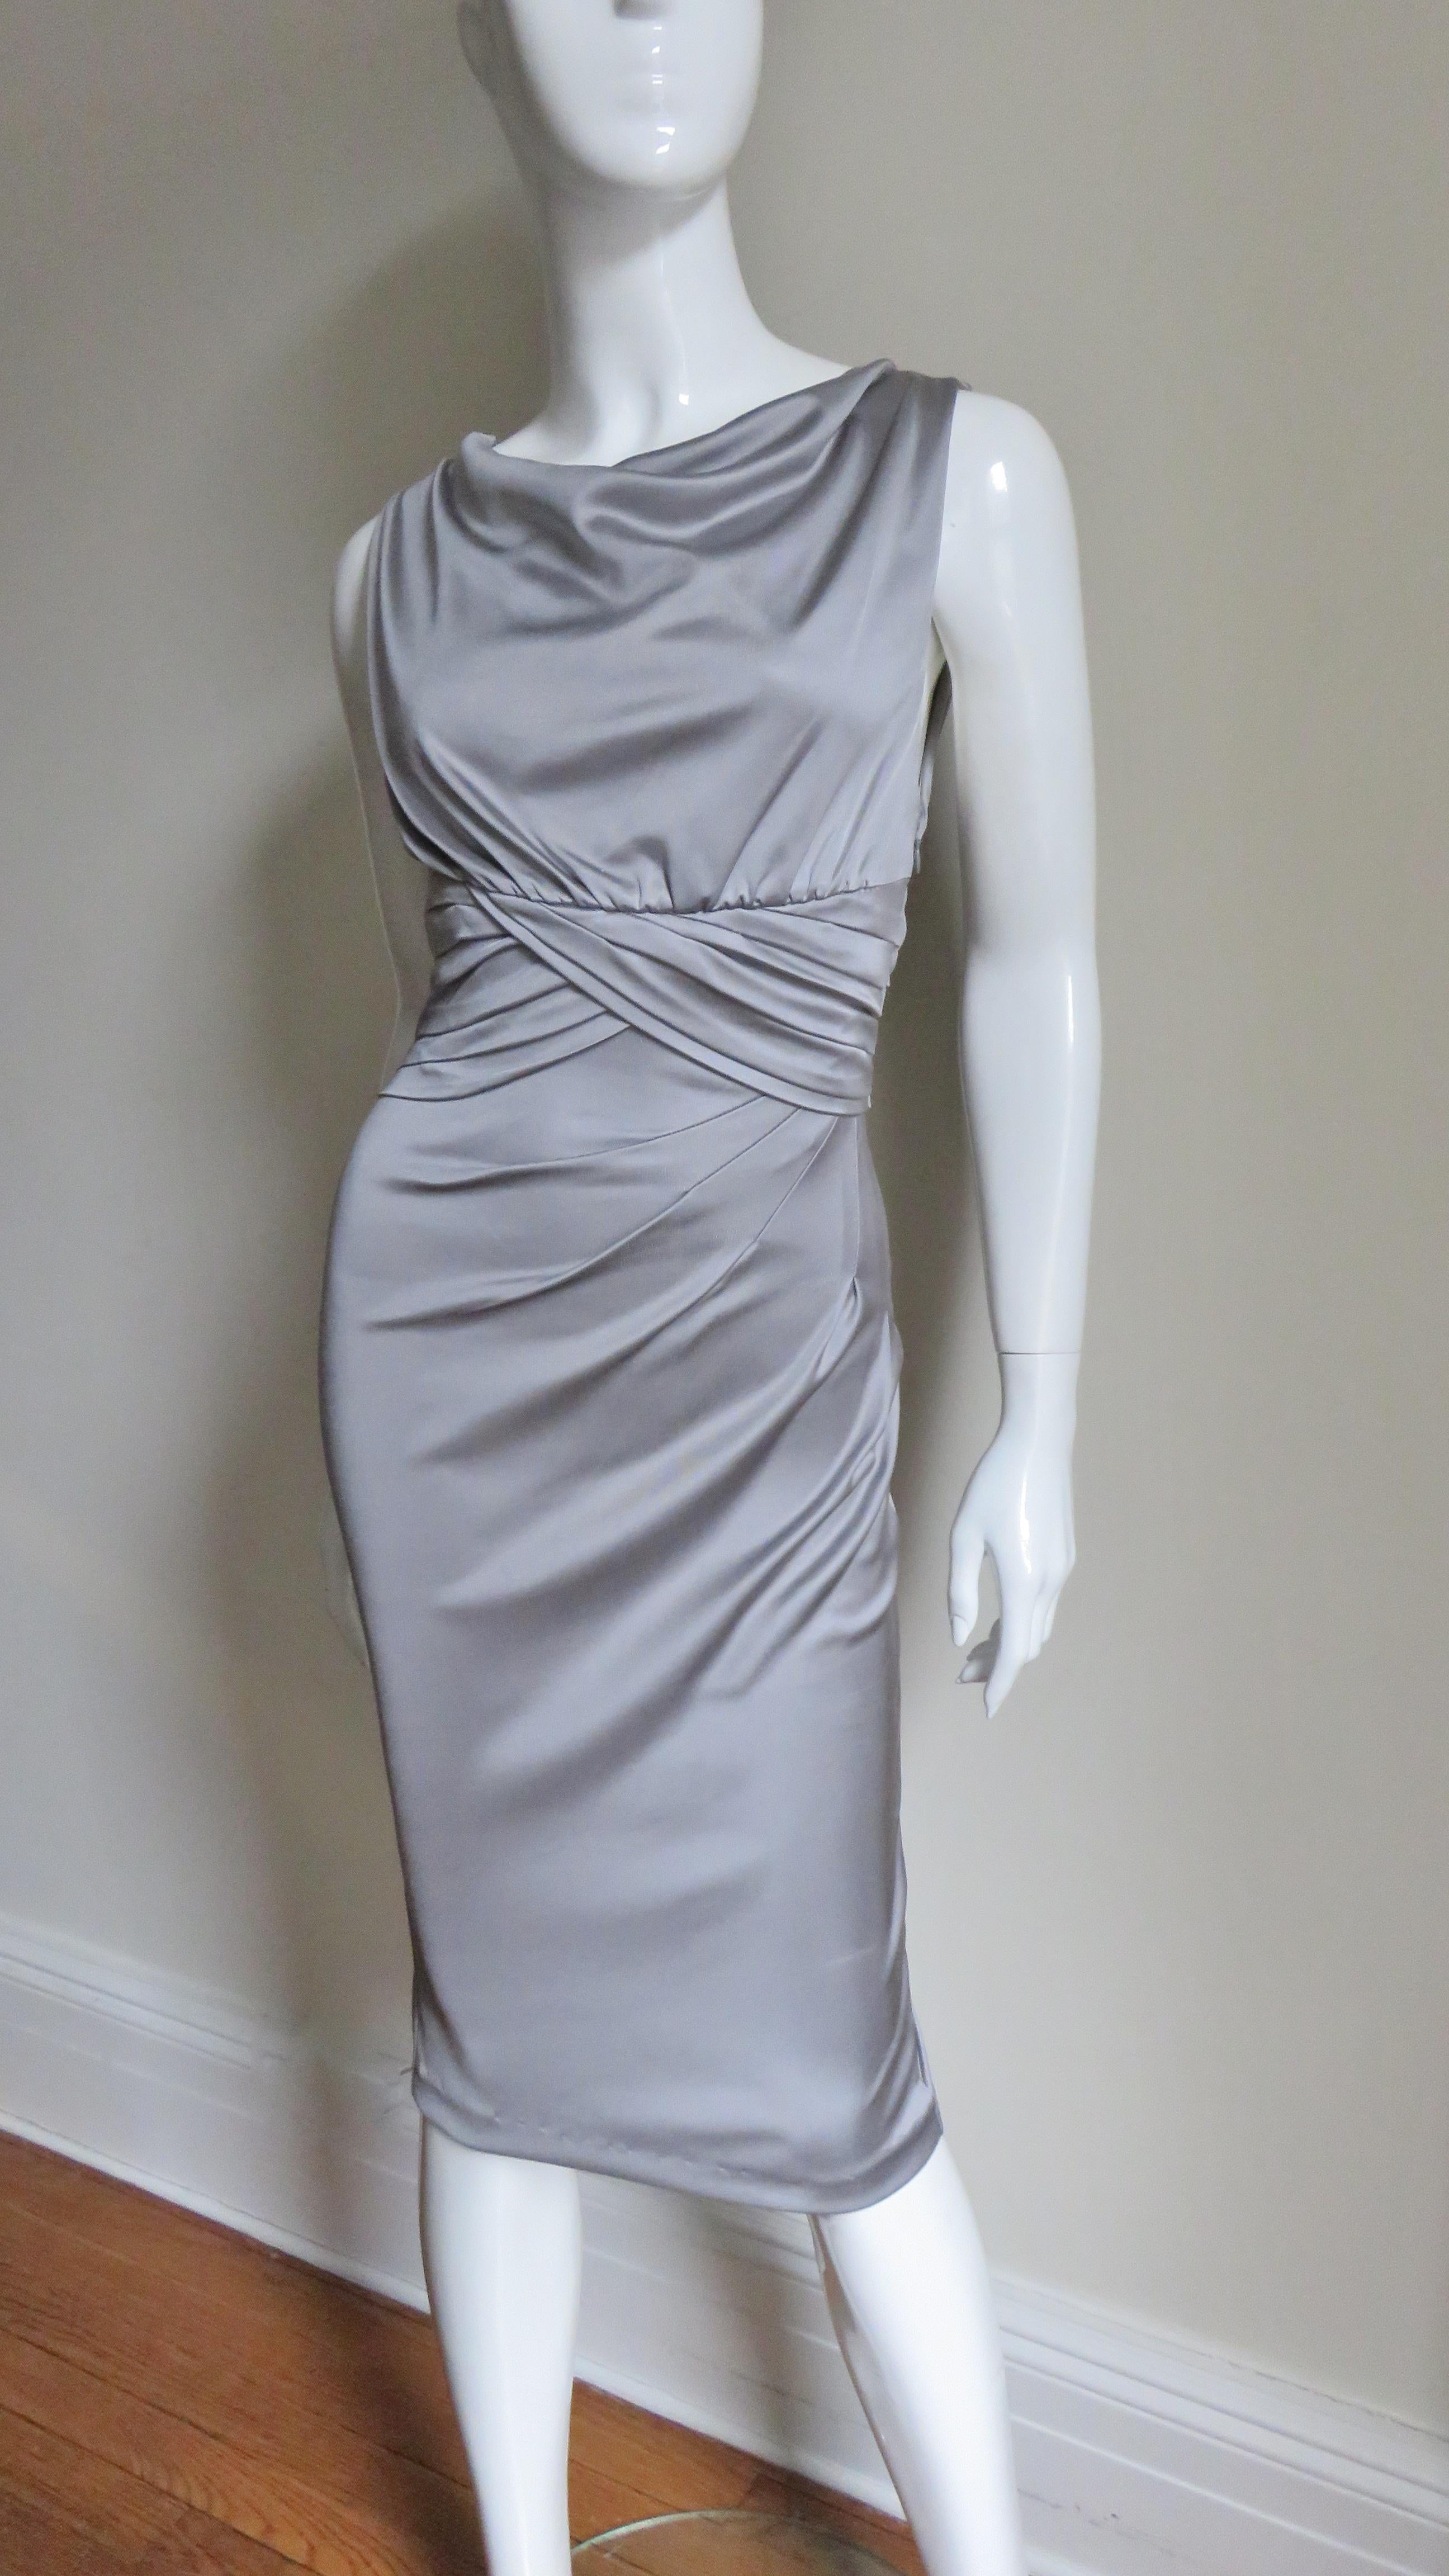 A beautiful grey fine silk jersey dress from Valentino.  It is sleeveless with a ruched waist and angled ruching across the front of the skirt creating very flattering lines. The bodice is lined in the same fabric and there is a matching side